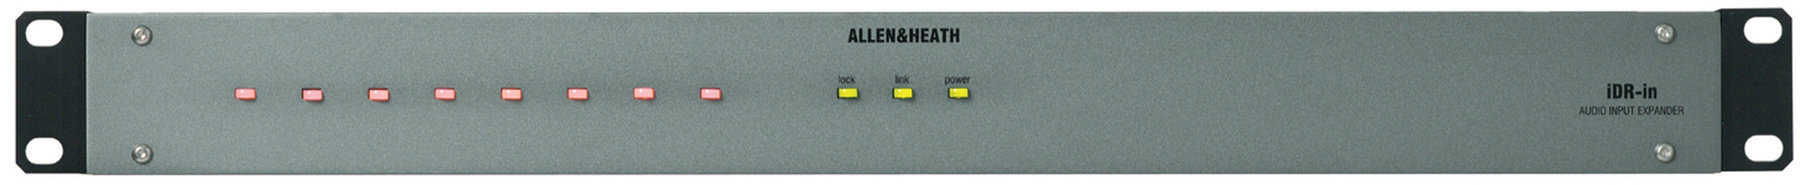 Protective Cover Allen & Heath iDR In